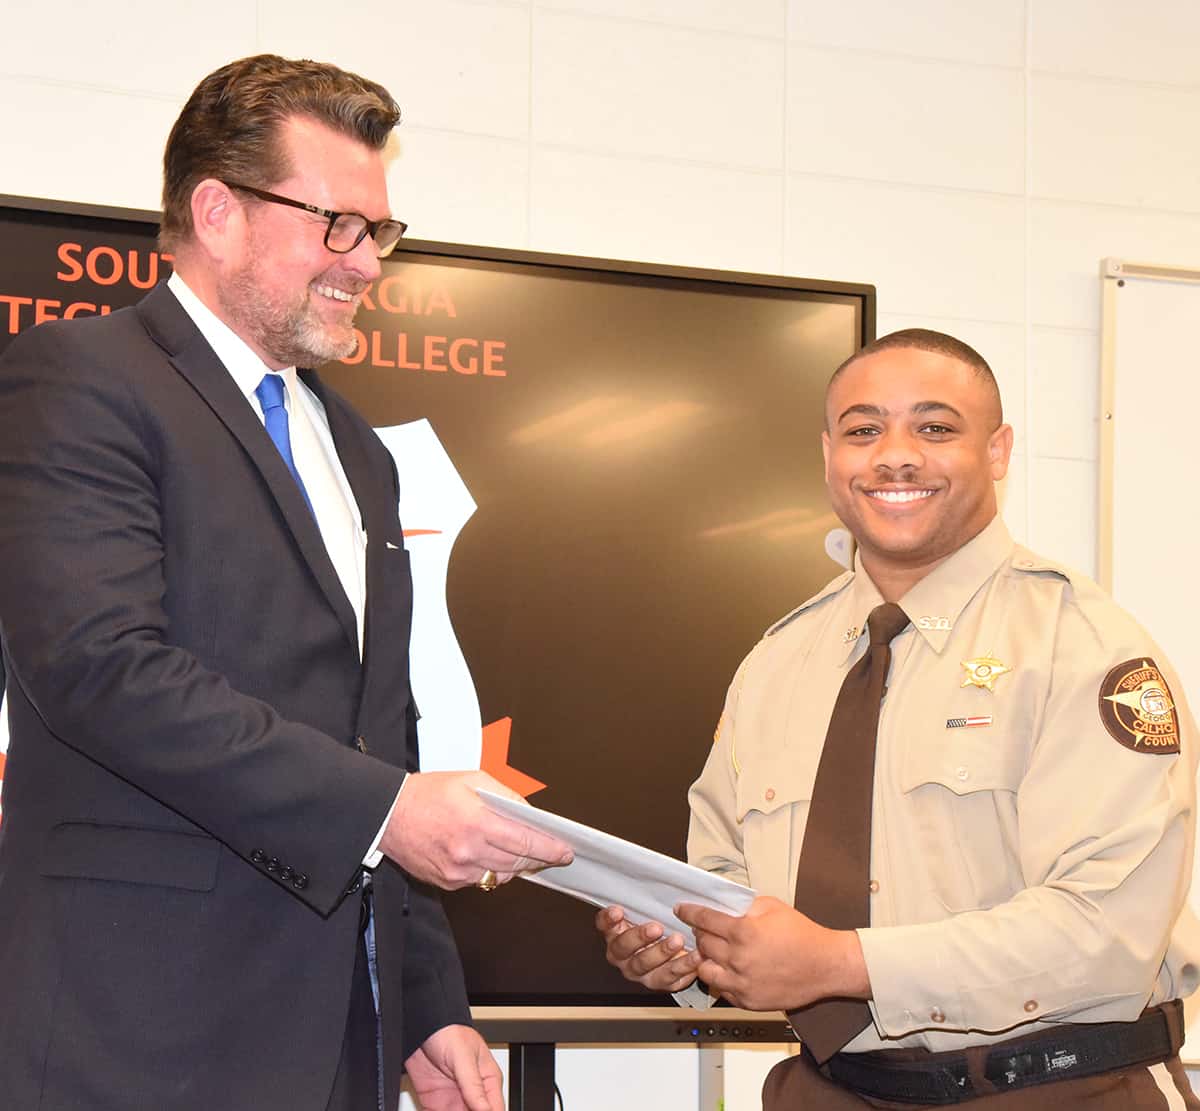 Dr. Watford is shown above with Cadet Marcellous Deshun who was named as the LEA Class 21-02 Class Representative and Top Gun award winner. He also received the Chief Vanessa Wall Criminal Justice/Law Enforcement Academy initial scholarship and the Lt. Michael Sangster Scholarship.